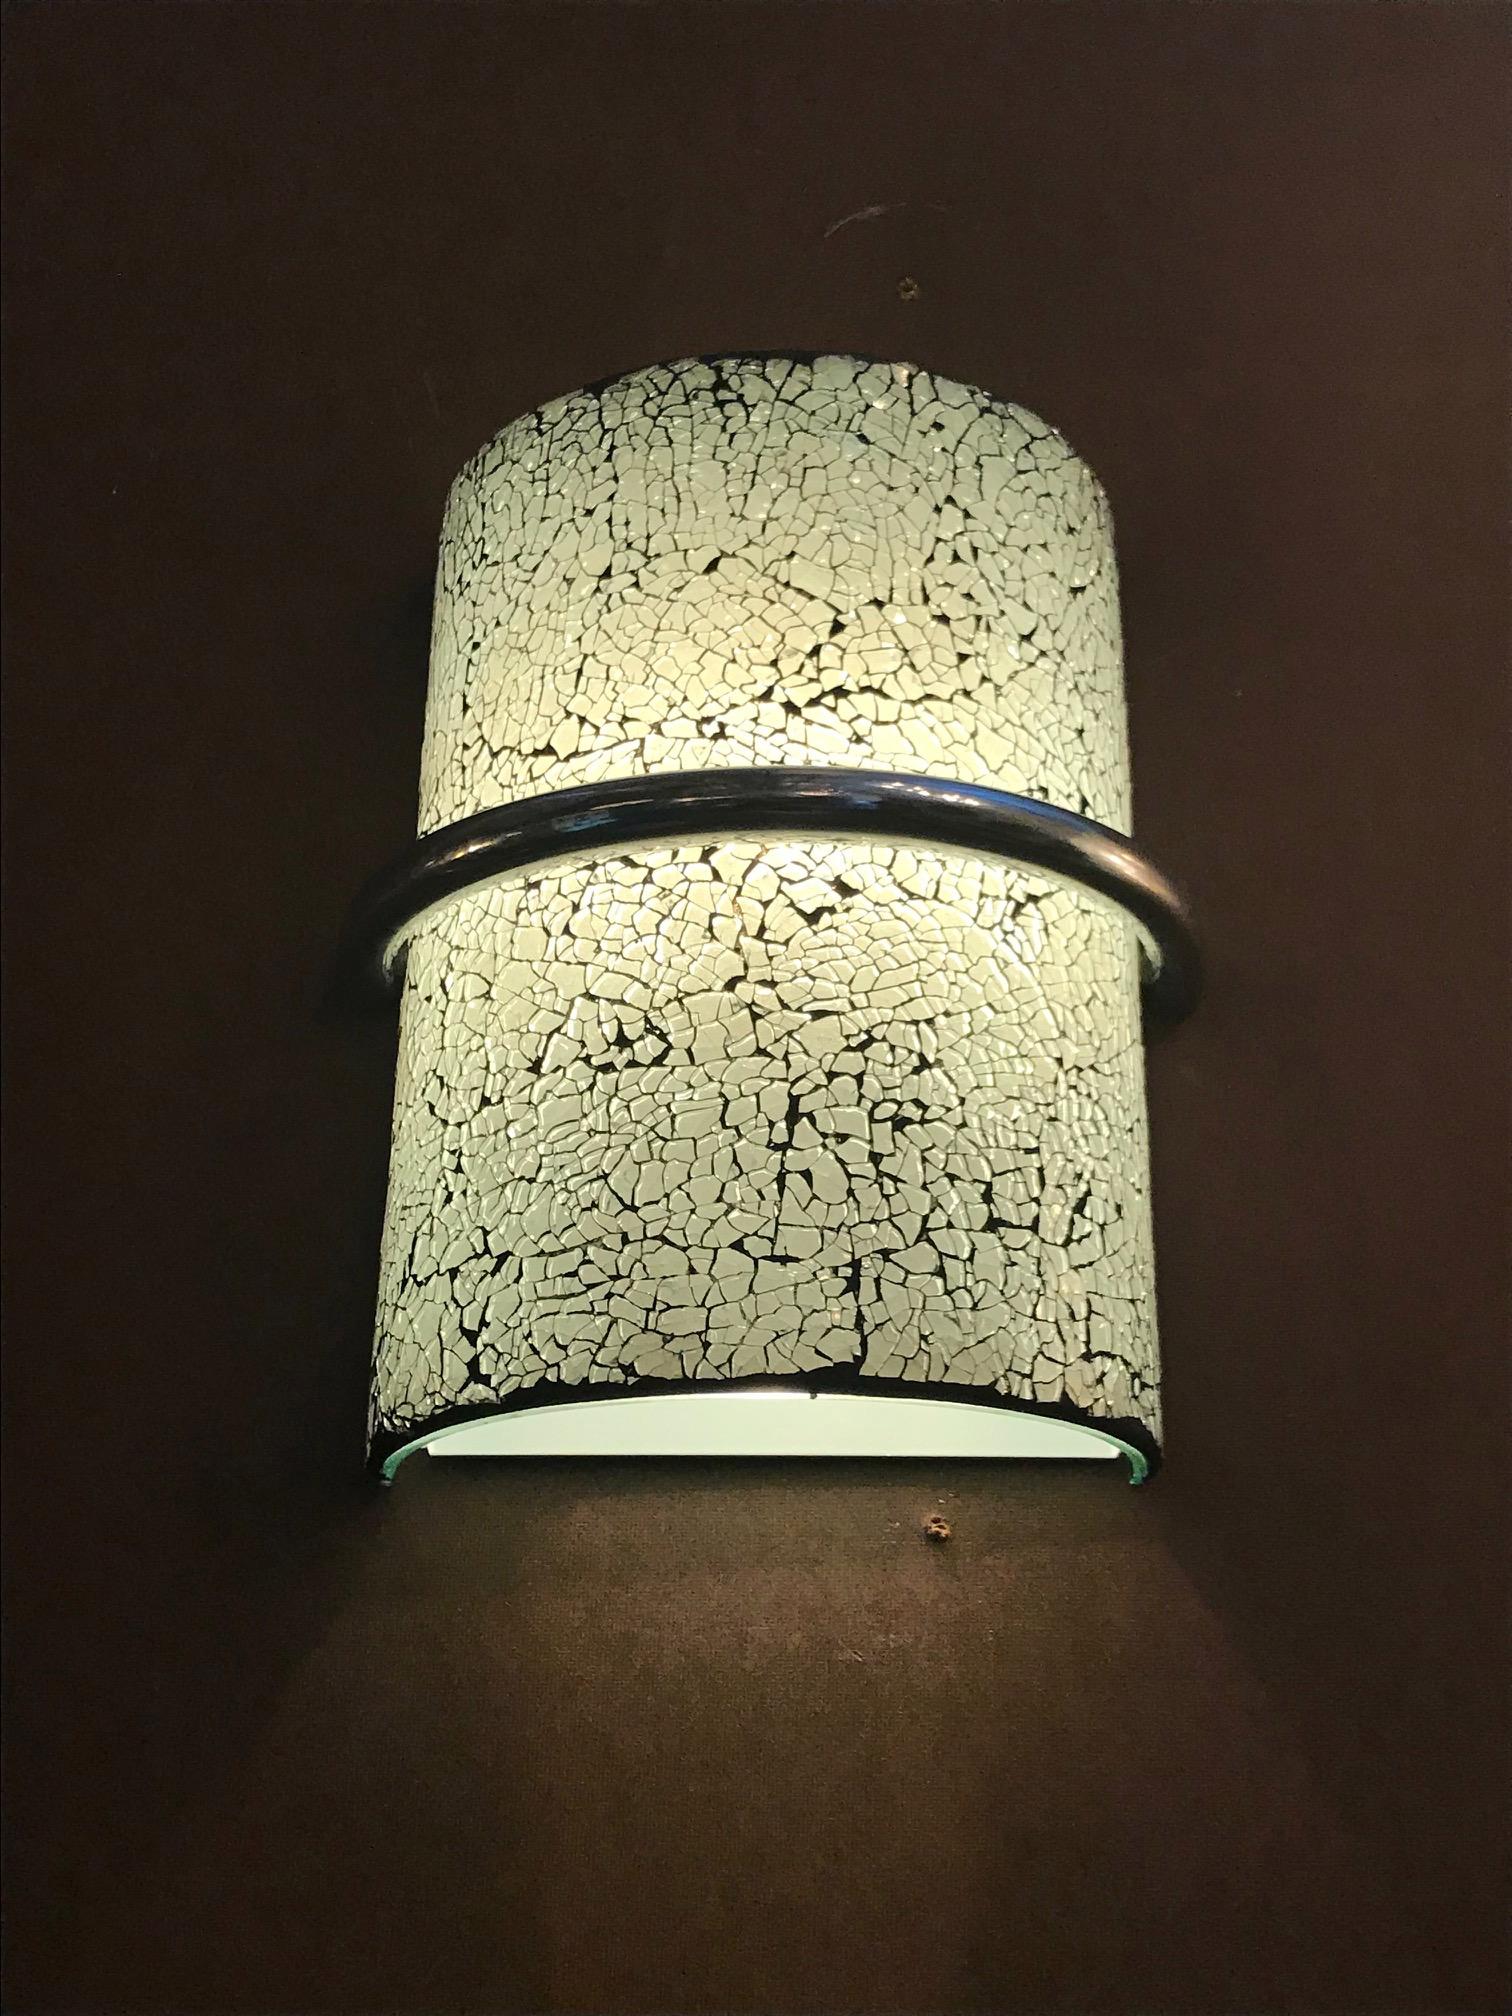 Limited edition stylish wall lights with beautiful crackled white glasses on chrome frames / Designed by Fabio Bergomi for Fabio Ltd 
1 light / E26 or E27 type / max 60W
Measures: Height 11 inches / width 9 inches / depth 5 inches 
12 in stock in